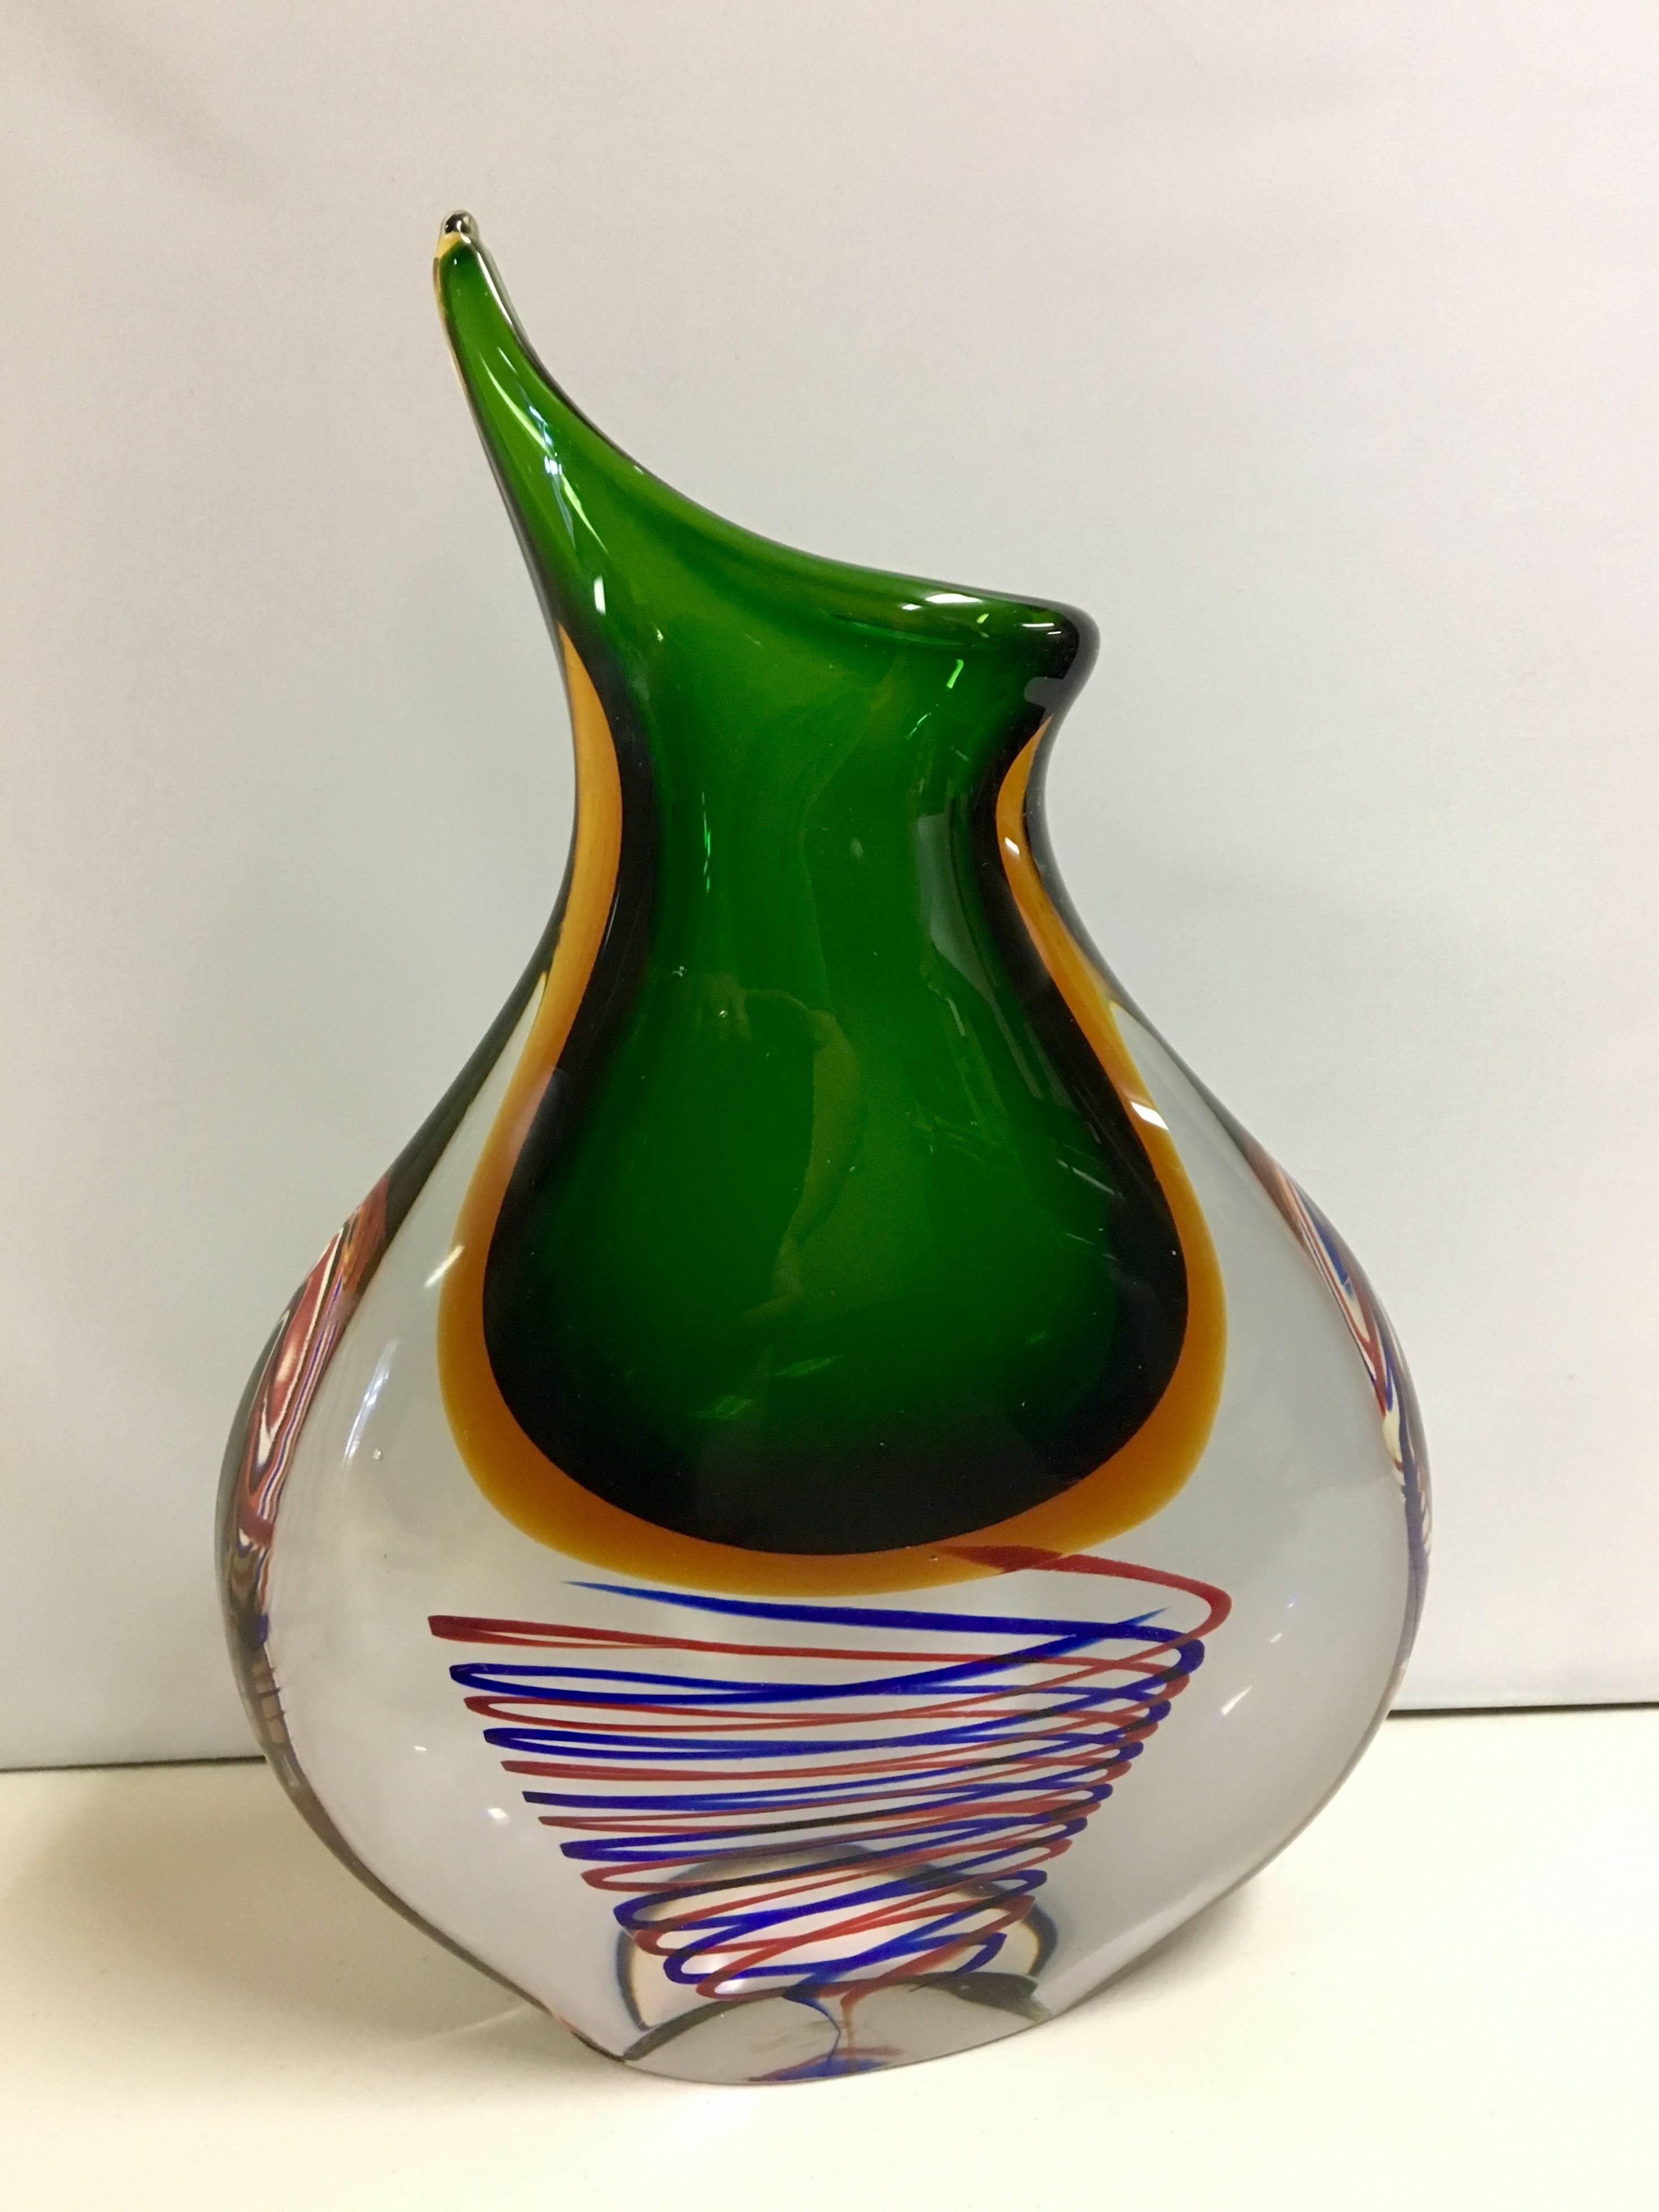 Beautiful and rare vase by Flavio Poli for Seguso, Murano, Sommerso organic glass vase. Vibrant colors on this incredible piece with a twisted swirl accent, at the bottom in red and blue, with a green, yellow and clear combo. No chips or cracks